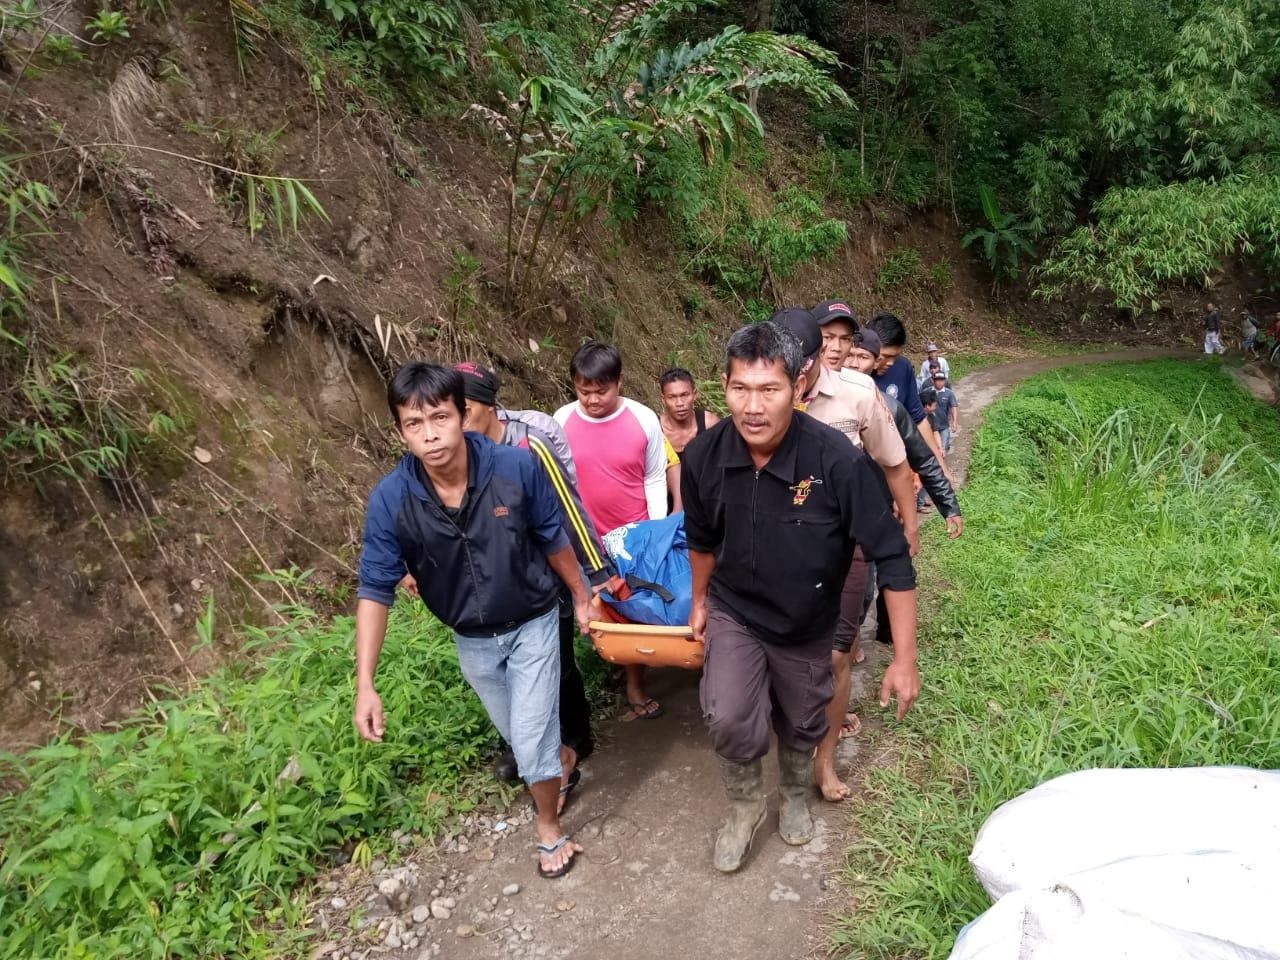 At least 26 killed as Indonesian bus tumbles into ravine